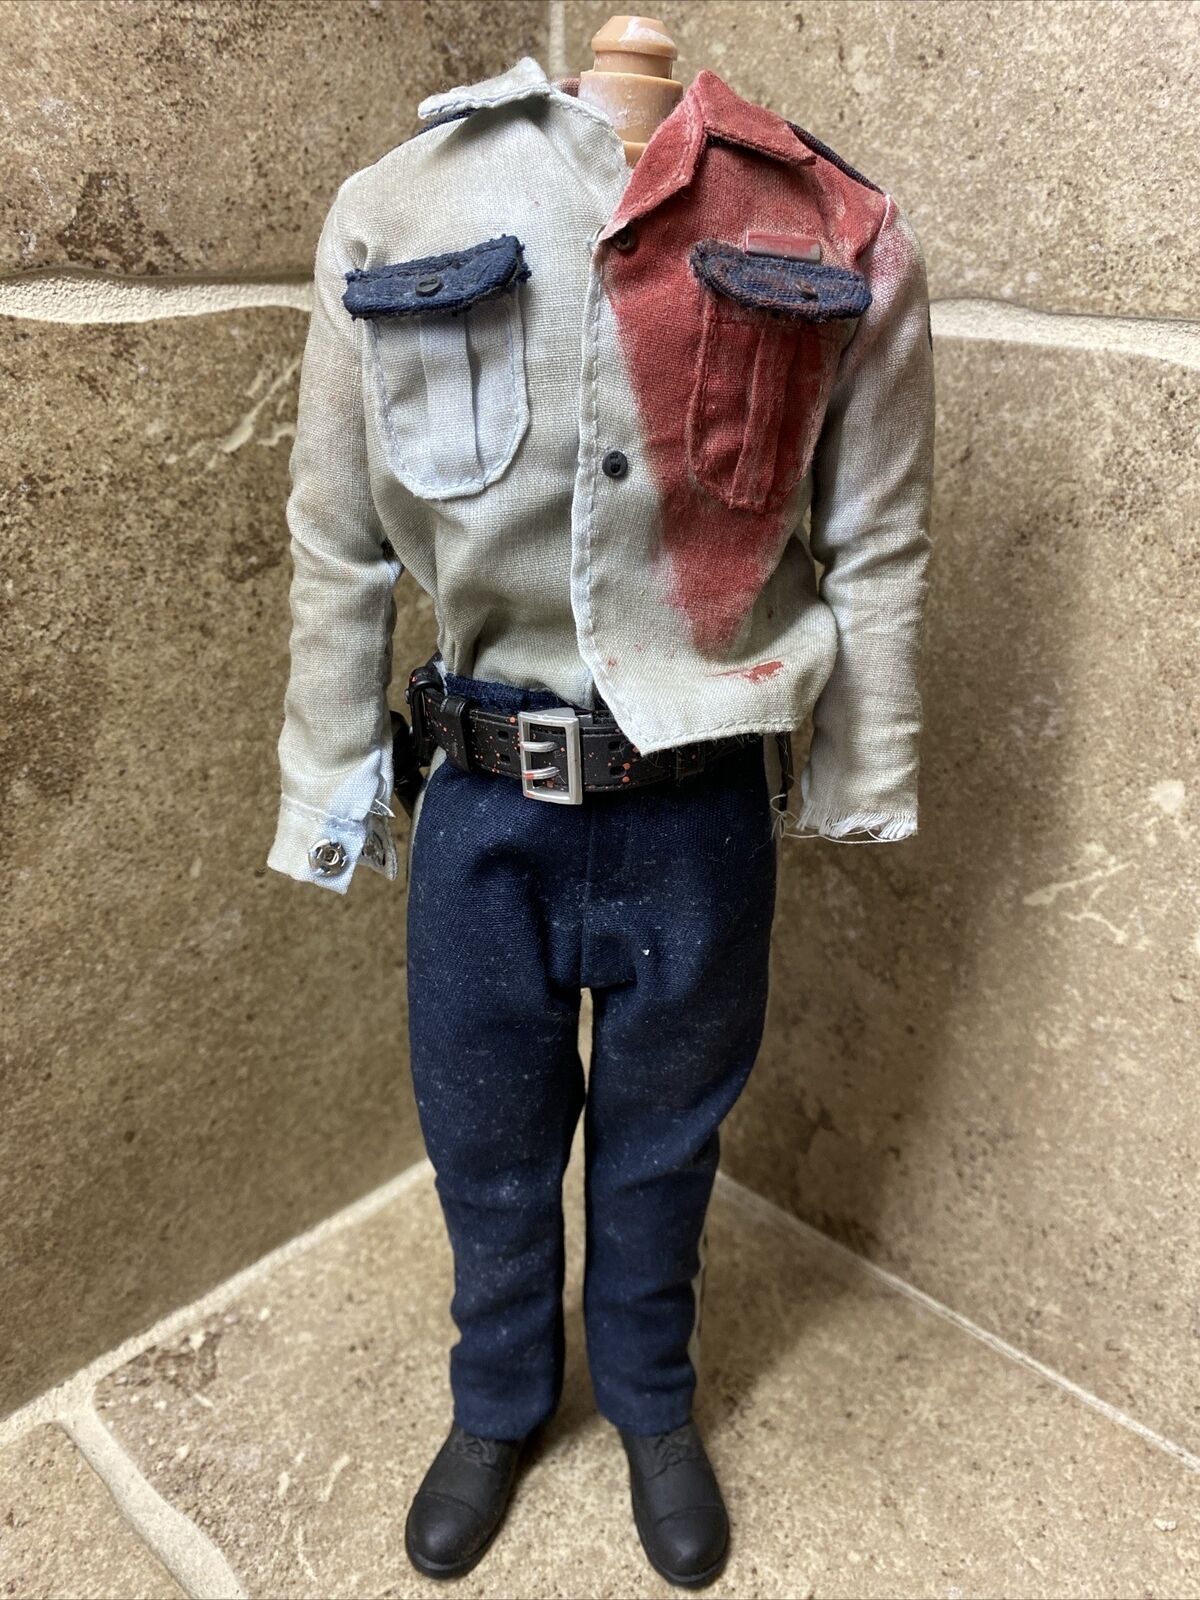 Fancy Sideshow Collectibles 1/6 Scale The Dead Subject 05 Security Guard Zombie Figure on eBay